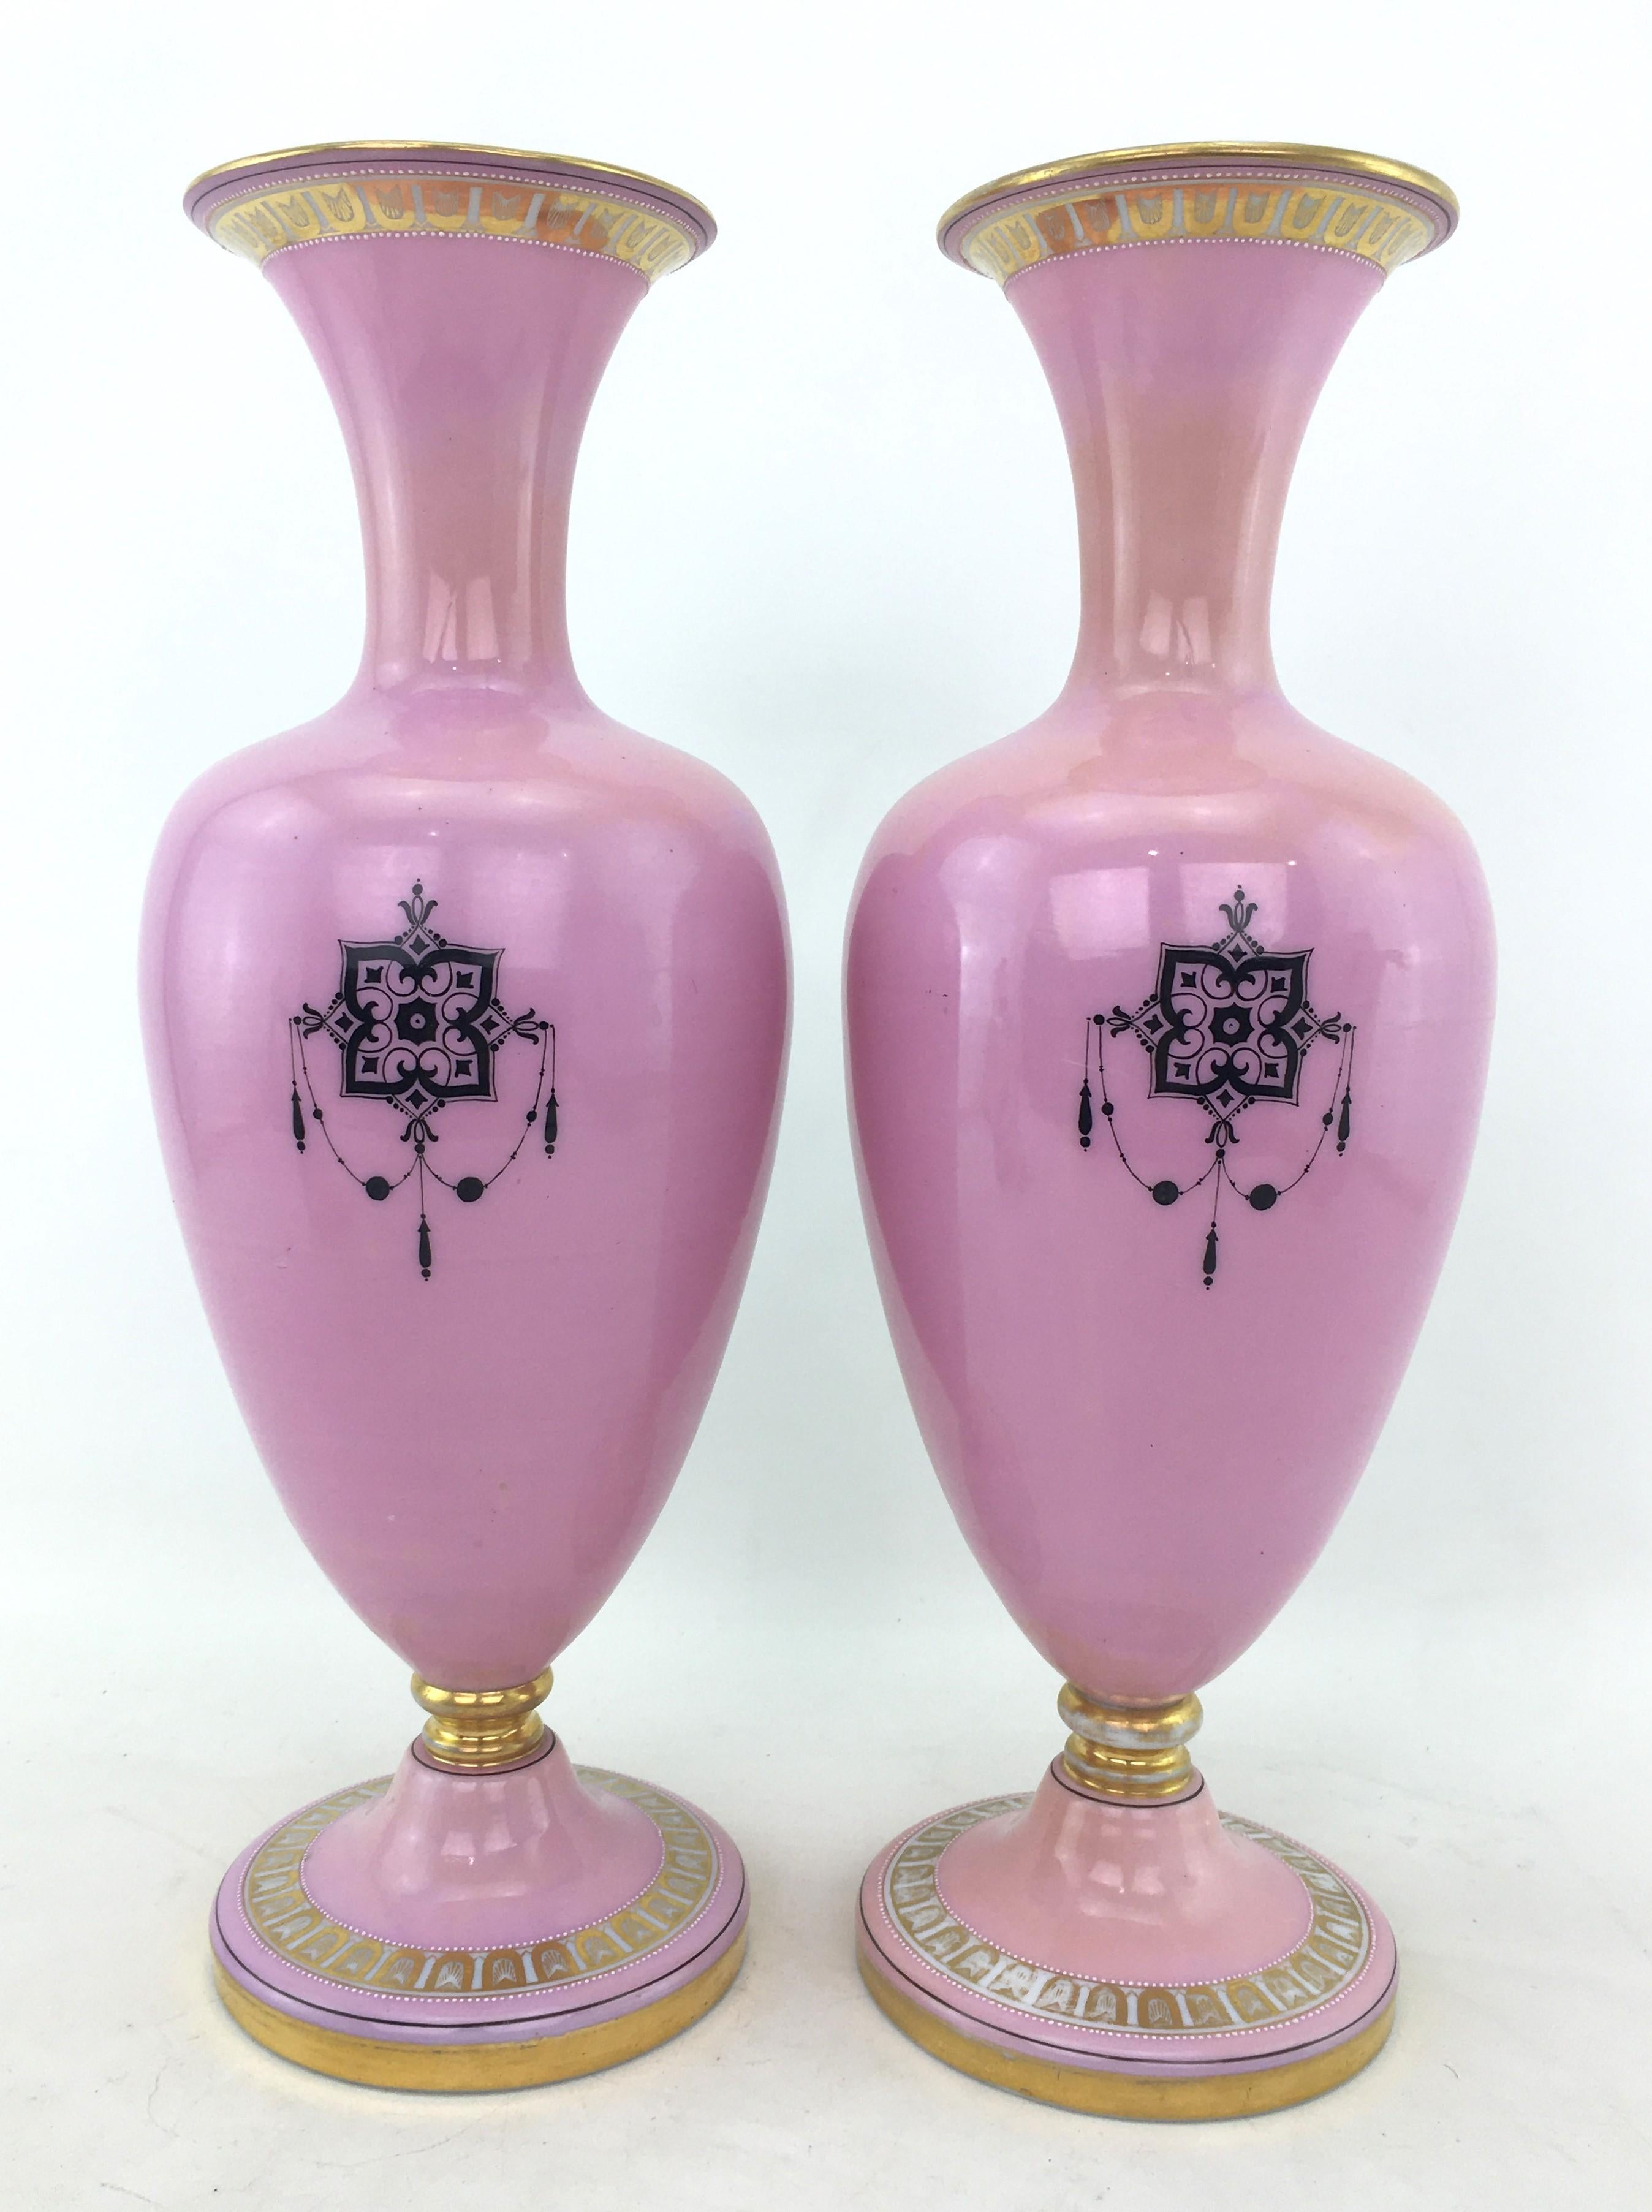 Pair of Large Antique Pink Enameled Glass Portrait Vases with Gilt Accents For Sale 1